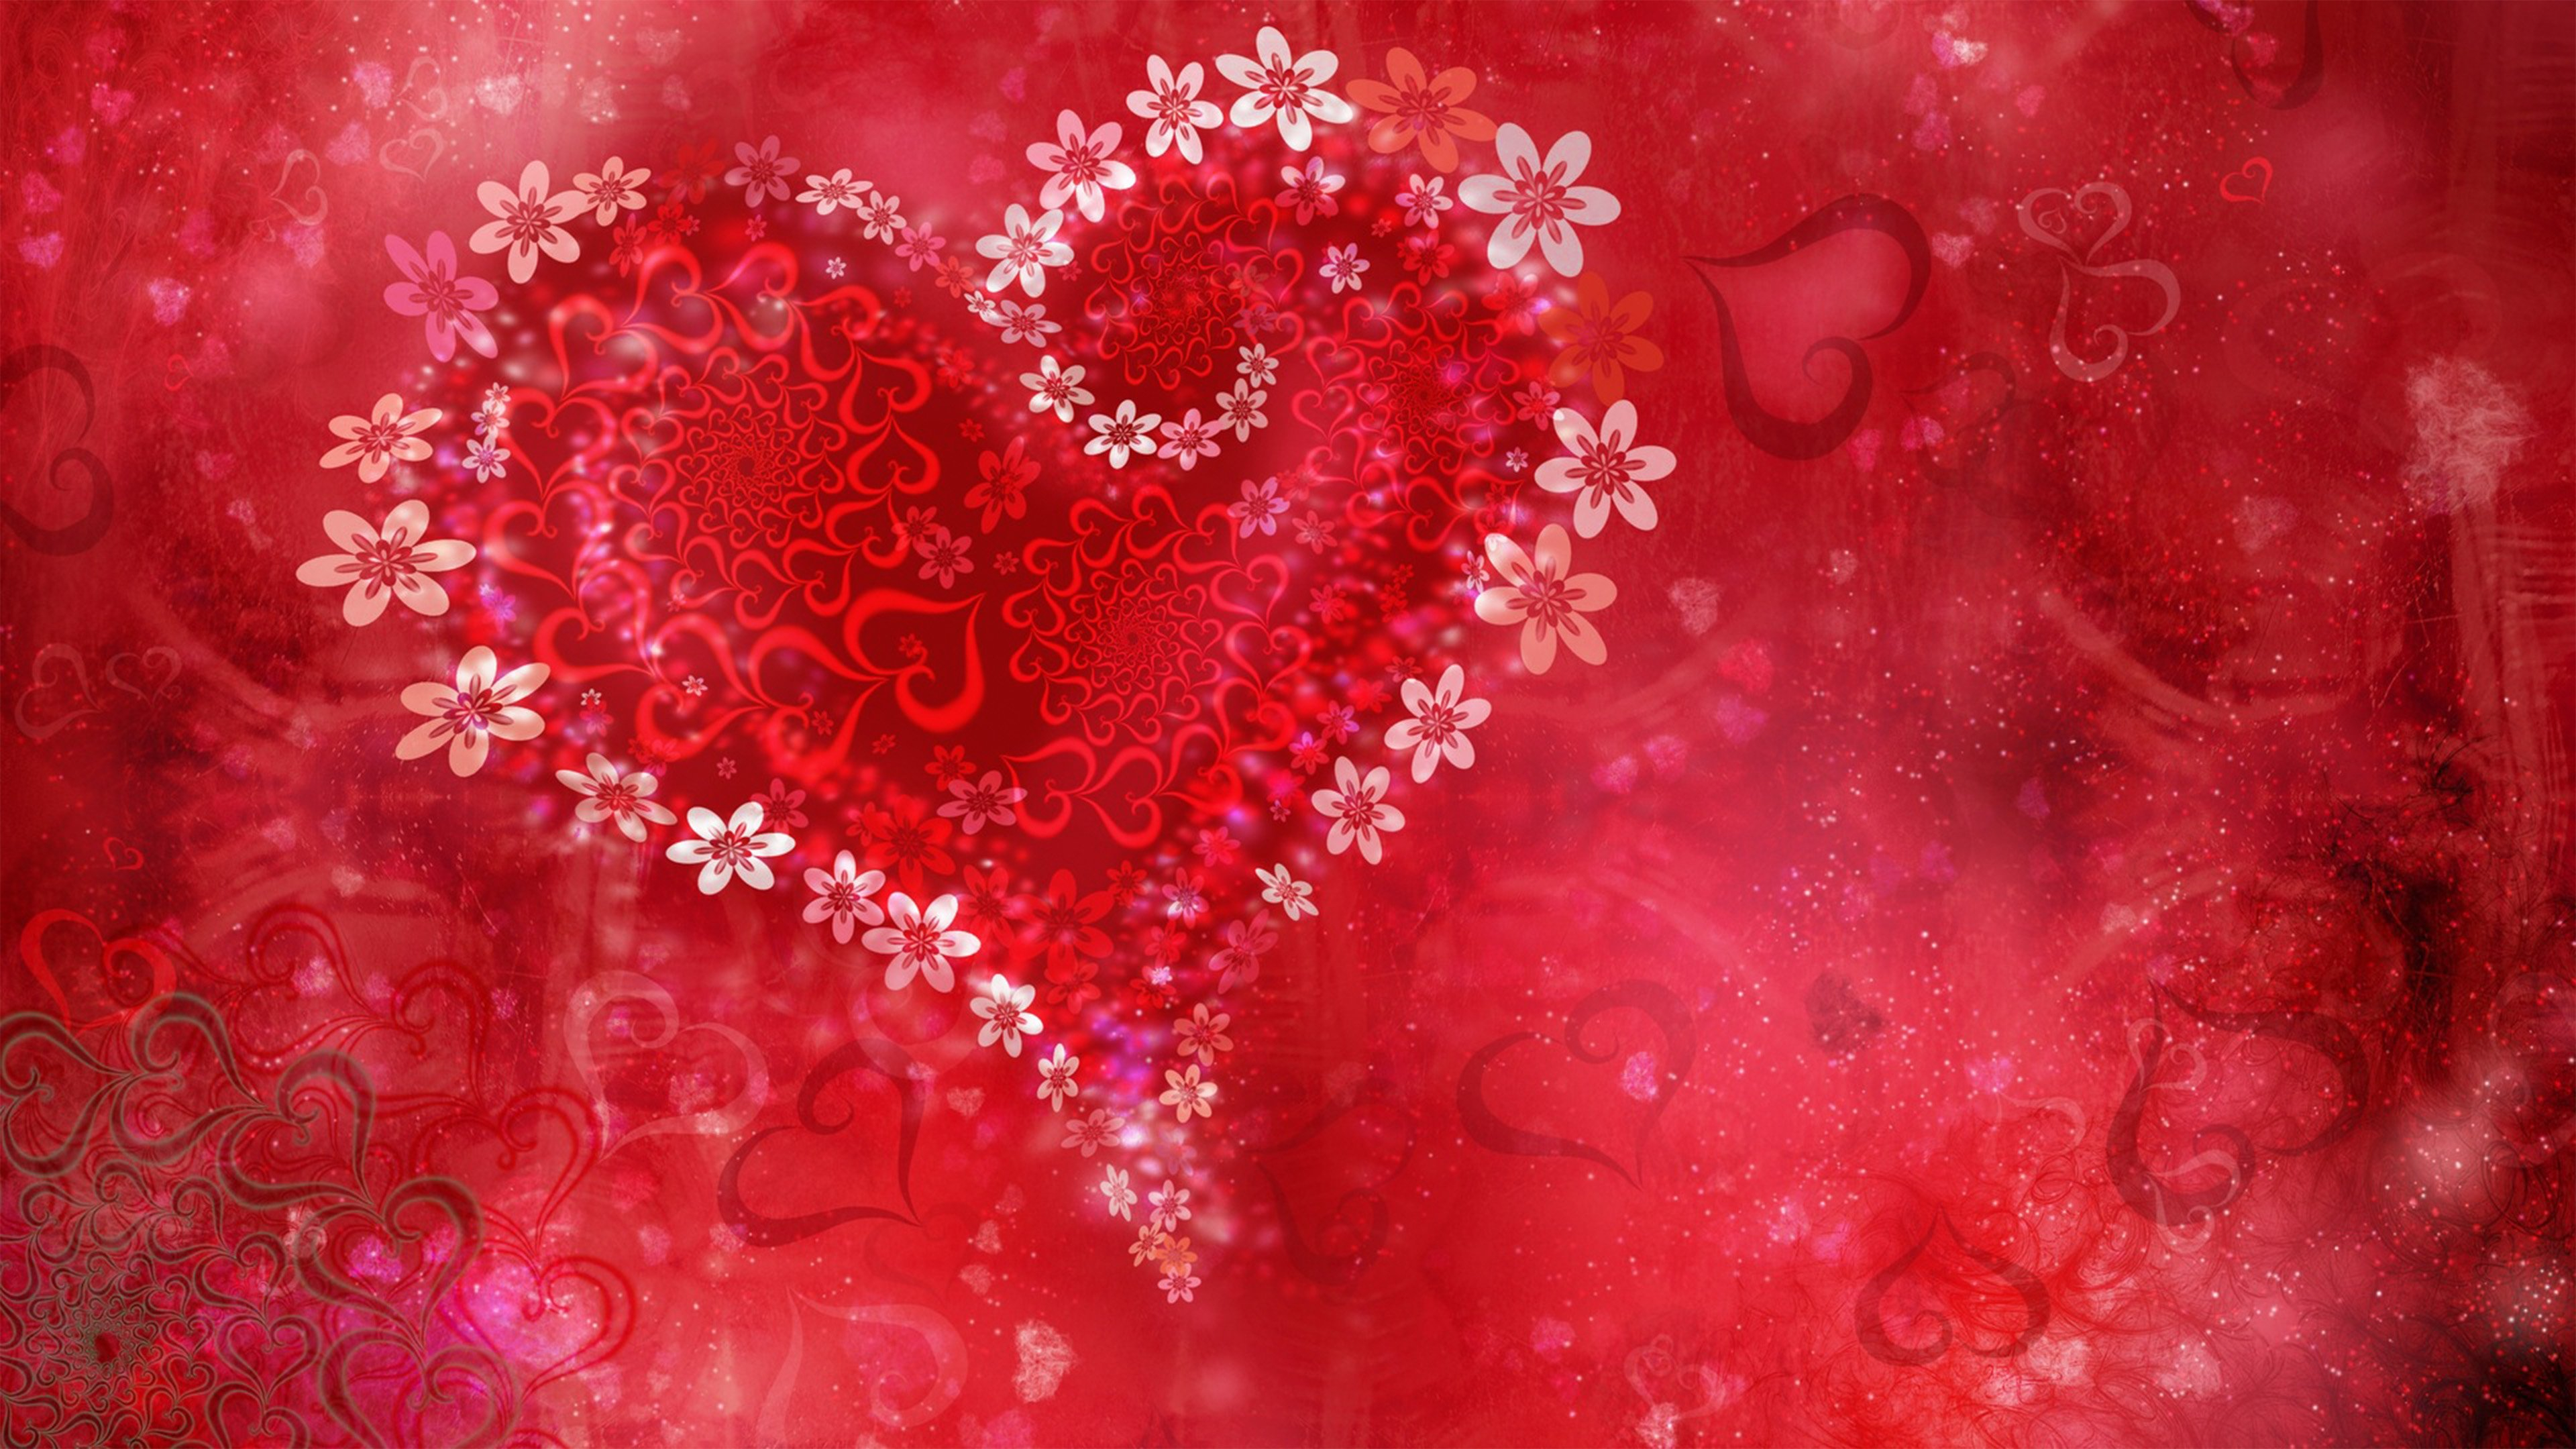 3840x2160 1920x1080 Valentine Day Heart 4k Laptop Full HD 1080P HD 4k Wallpapers, Images, Backgrounds, Photos and Pictures